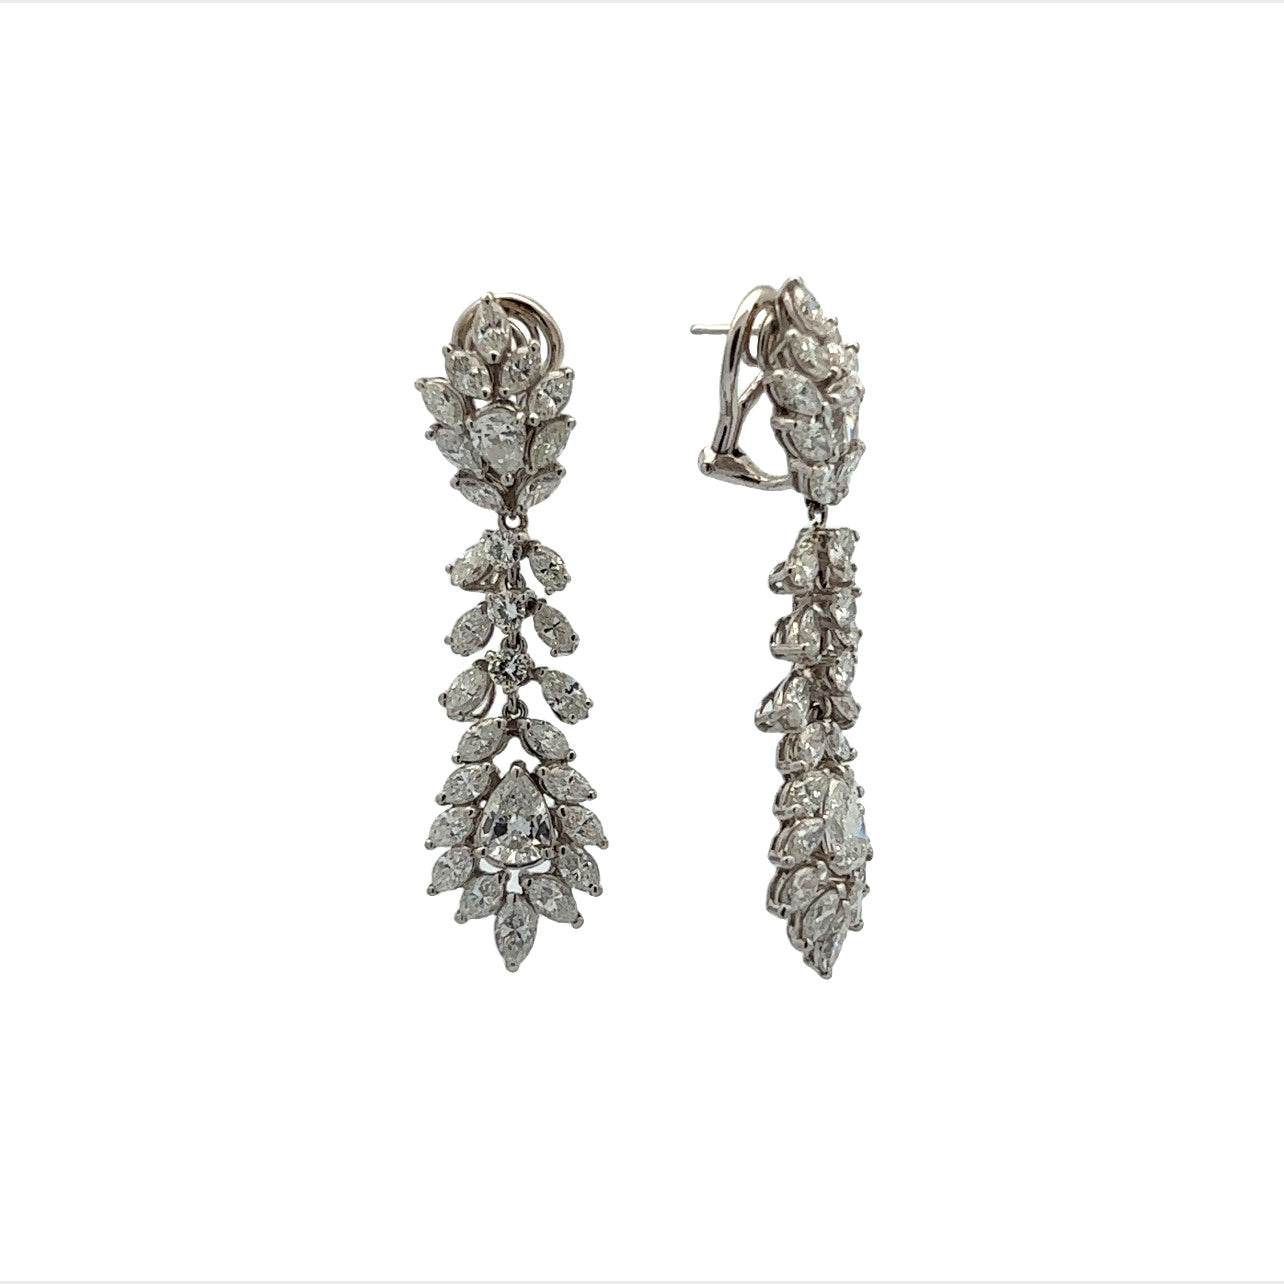 1960s Platinum Diamond Earrings front and side view